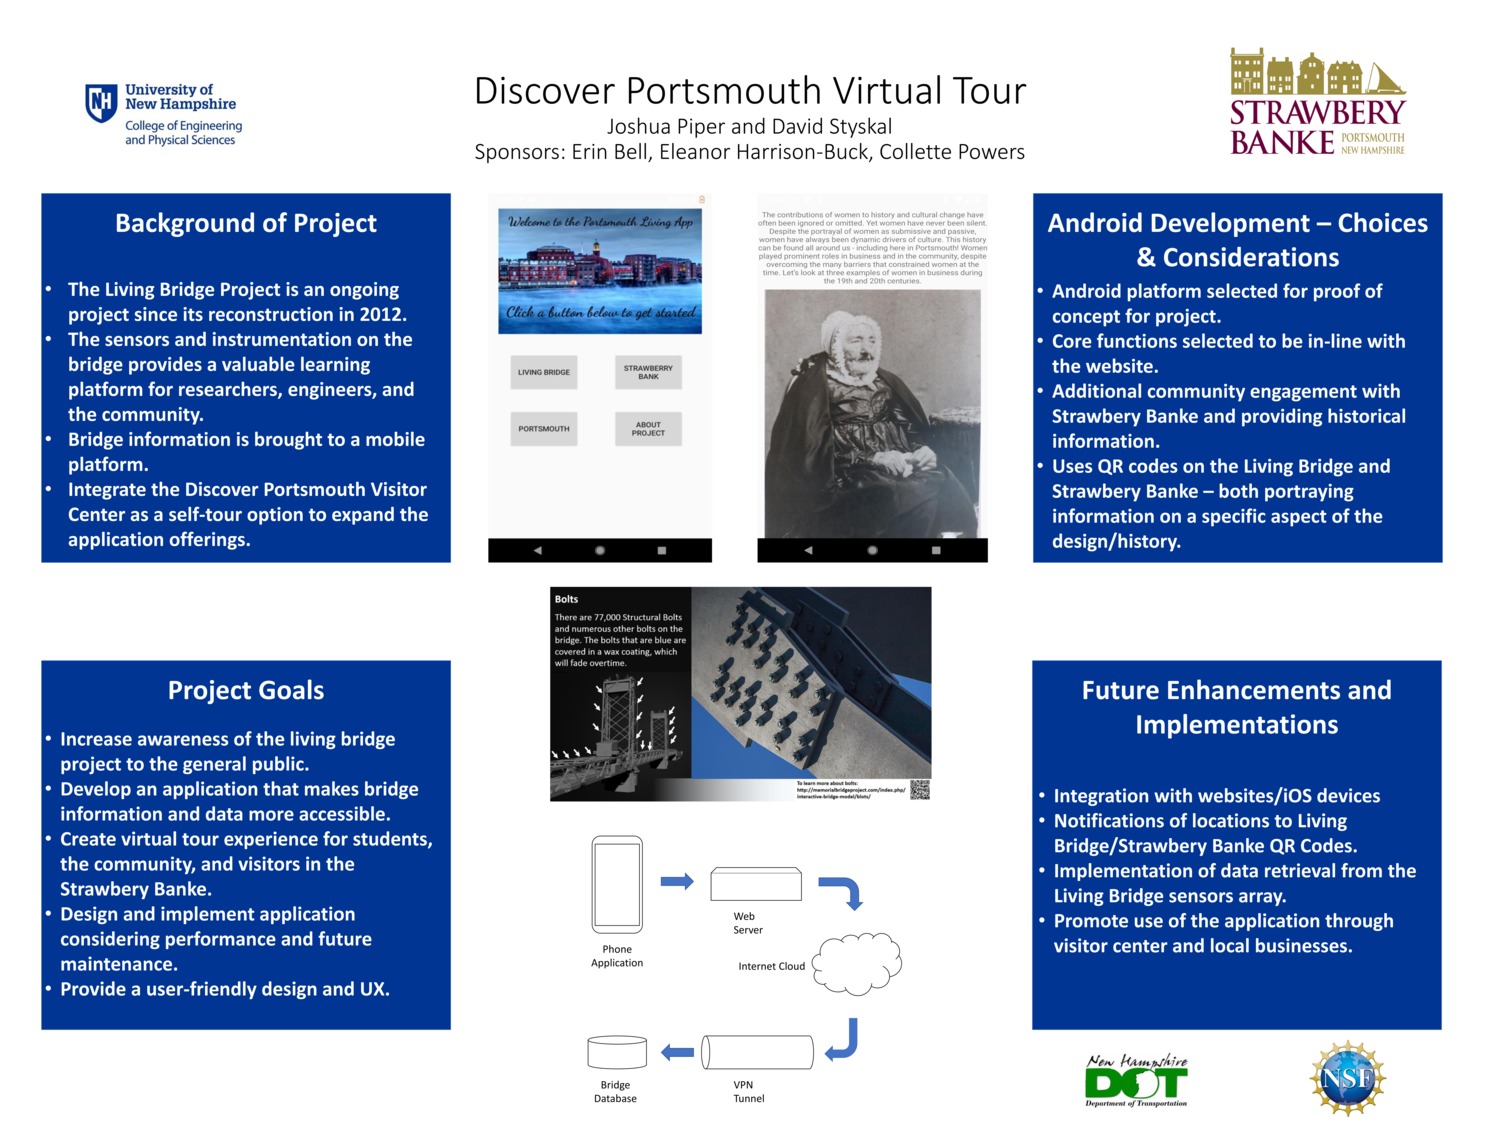 Discover Portsmouth Virtual Tour by drs1012